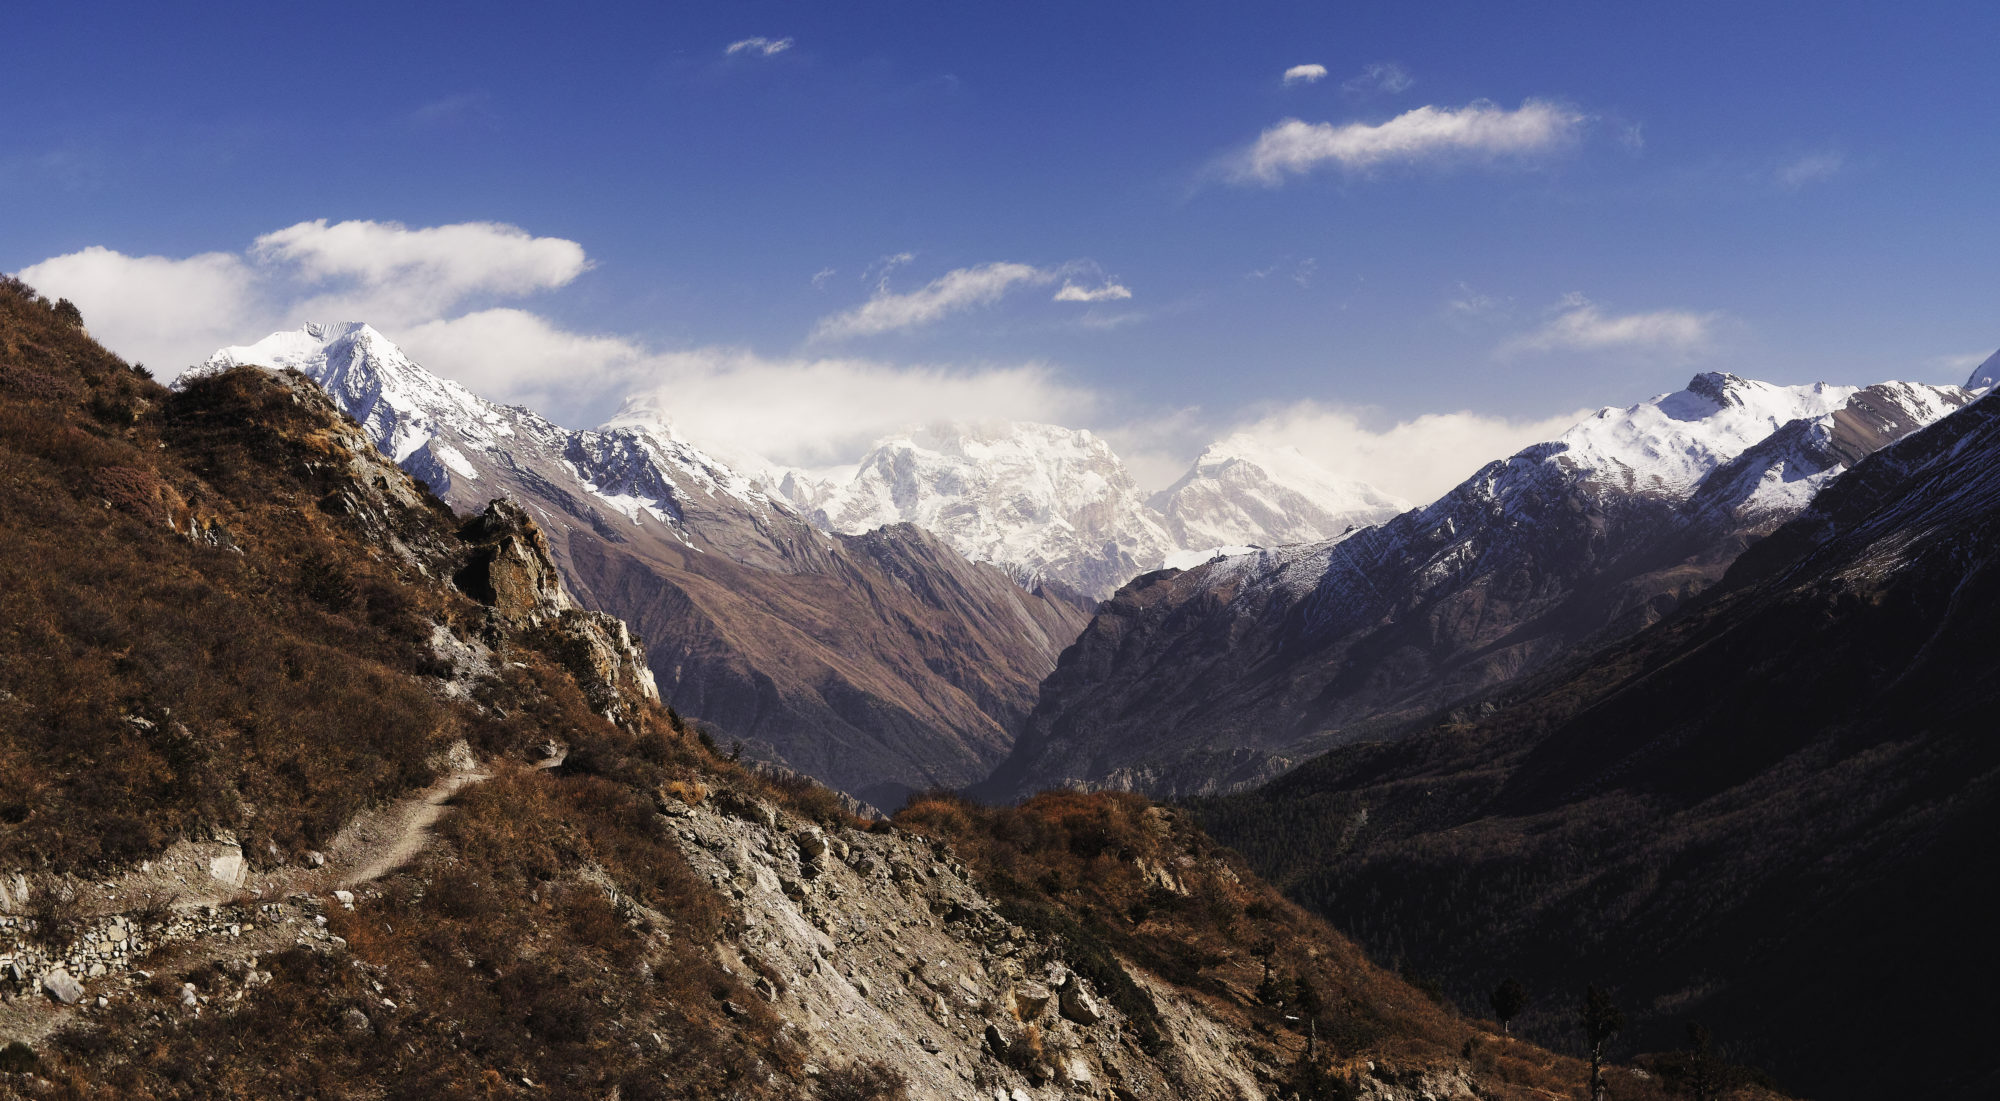 Annapurna is a vast massif with several peaks above 7000 metres. Photo: S. Choi/Flickr